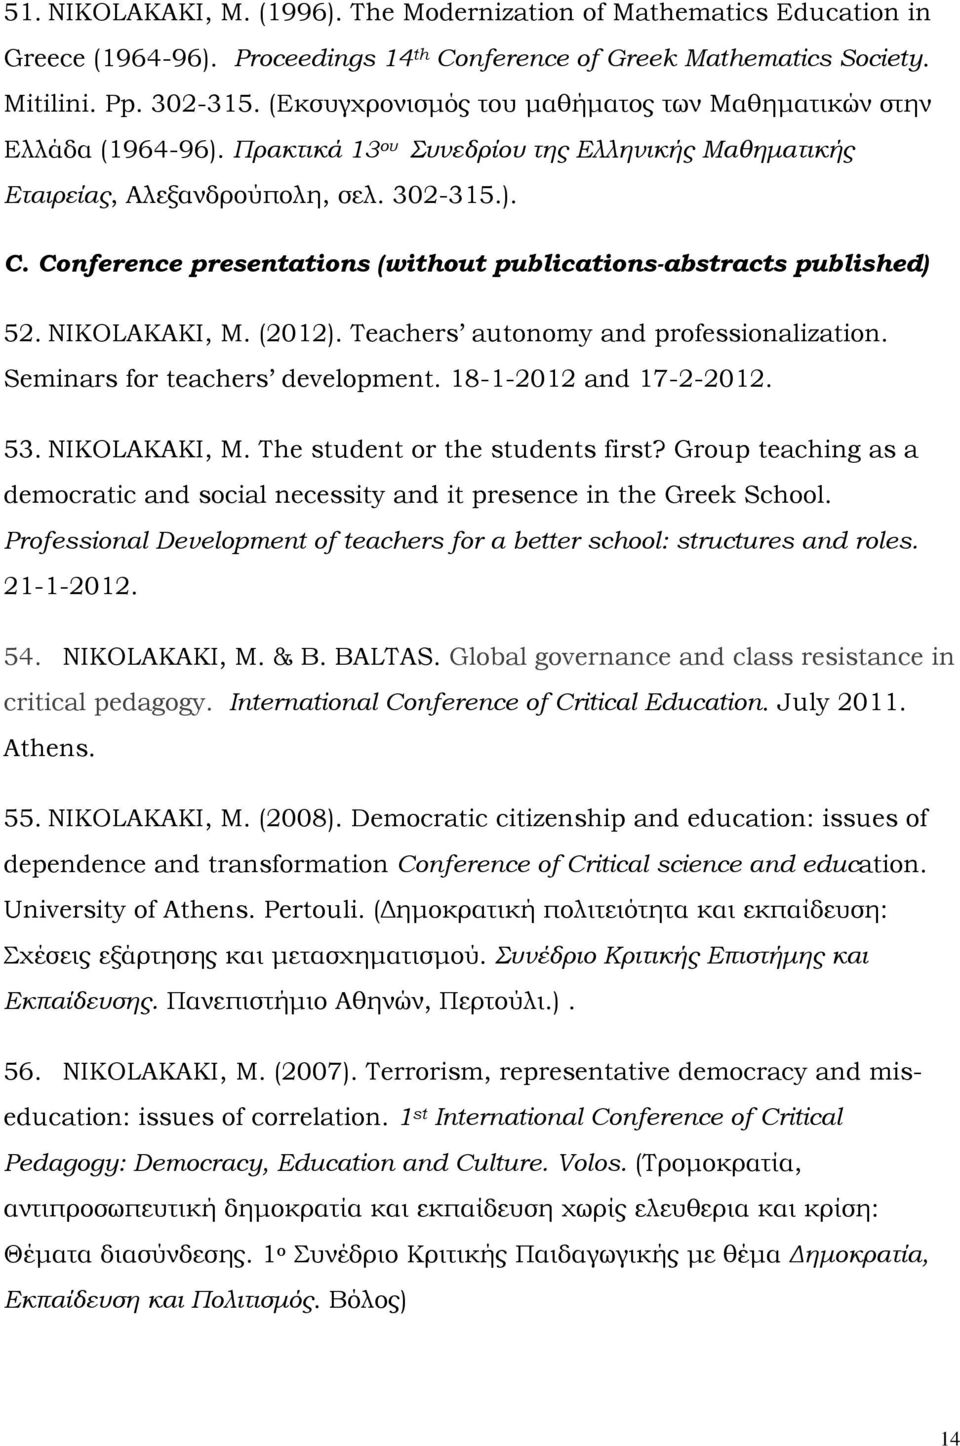 Conference presentations (without publications-abstracts published) 52. NIKOLAKAKI, M. (2012). Teachers autonomy and professionalization. Seminars for teachers development. 18-1-2012 and 17-2-2012.